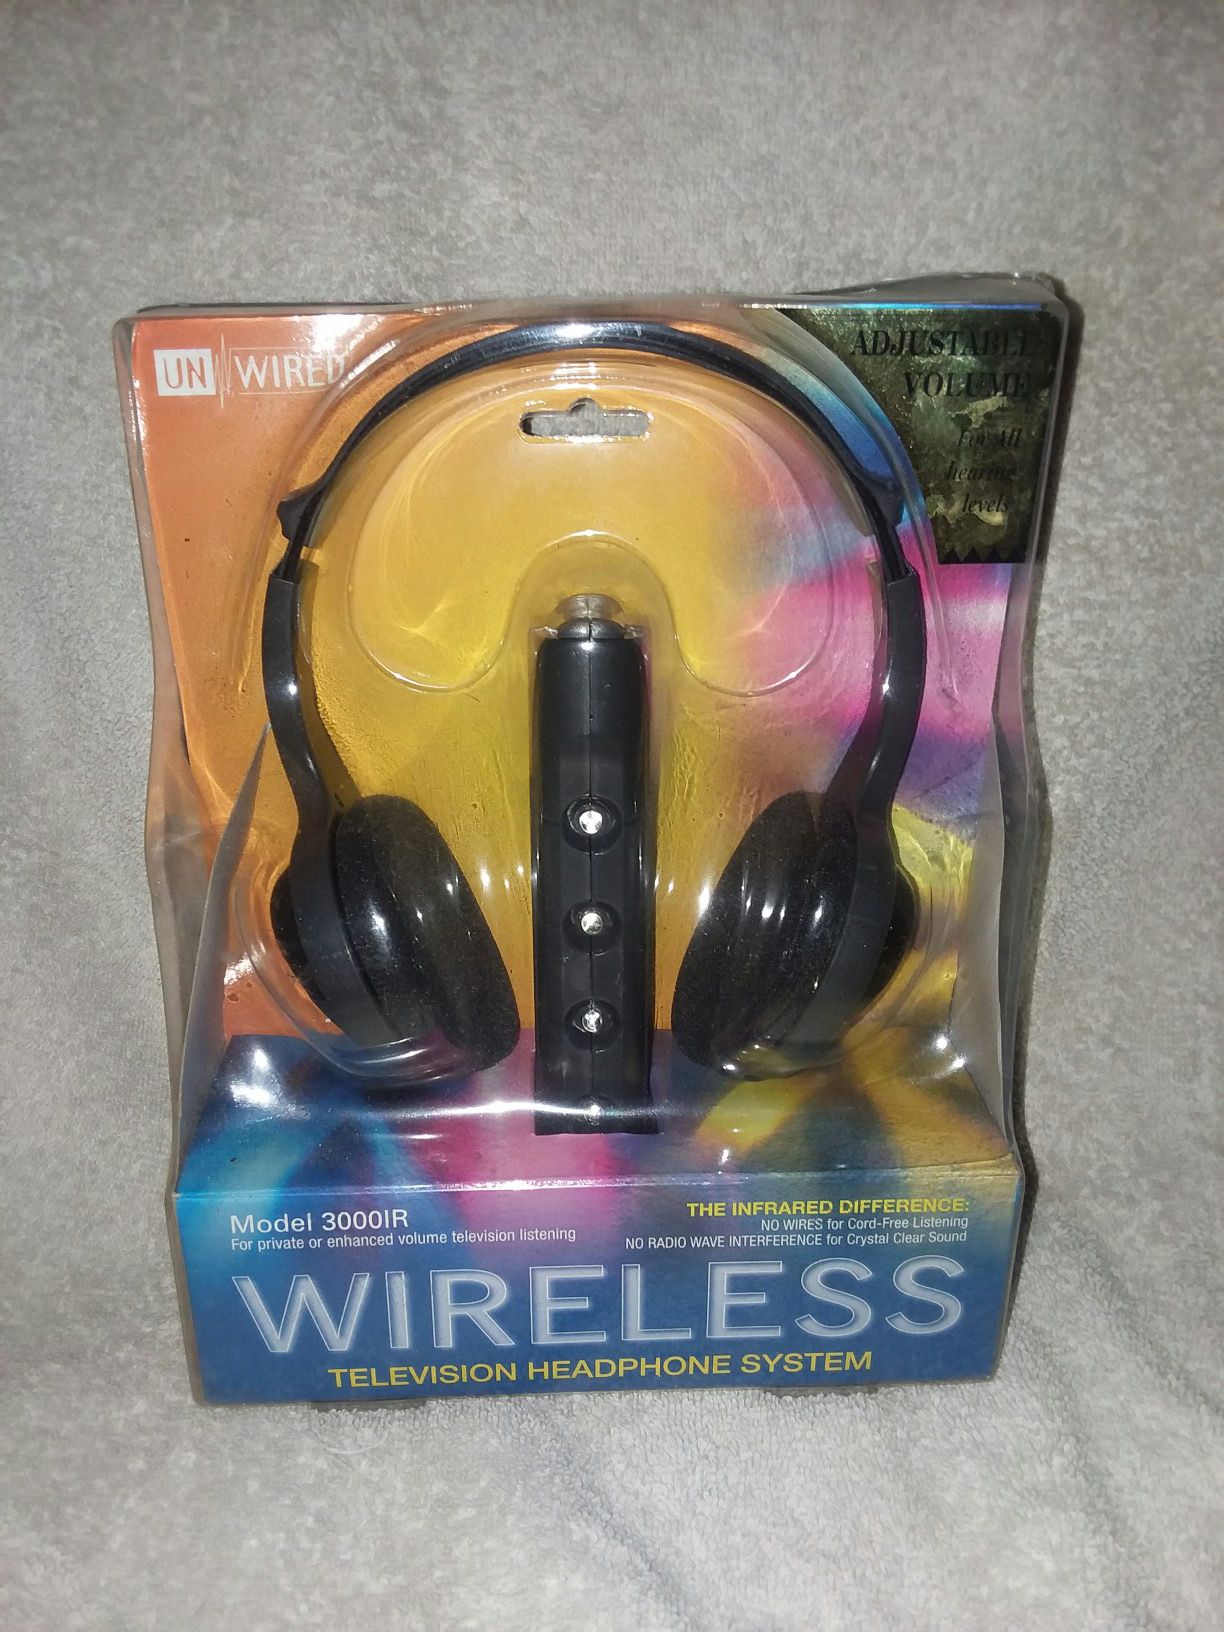 UnWired Wireless Infrared Stereo Headphone 3000 IR System-New In Box